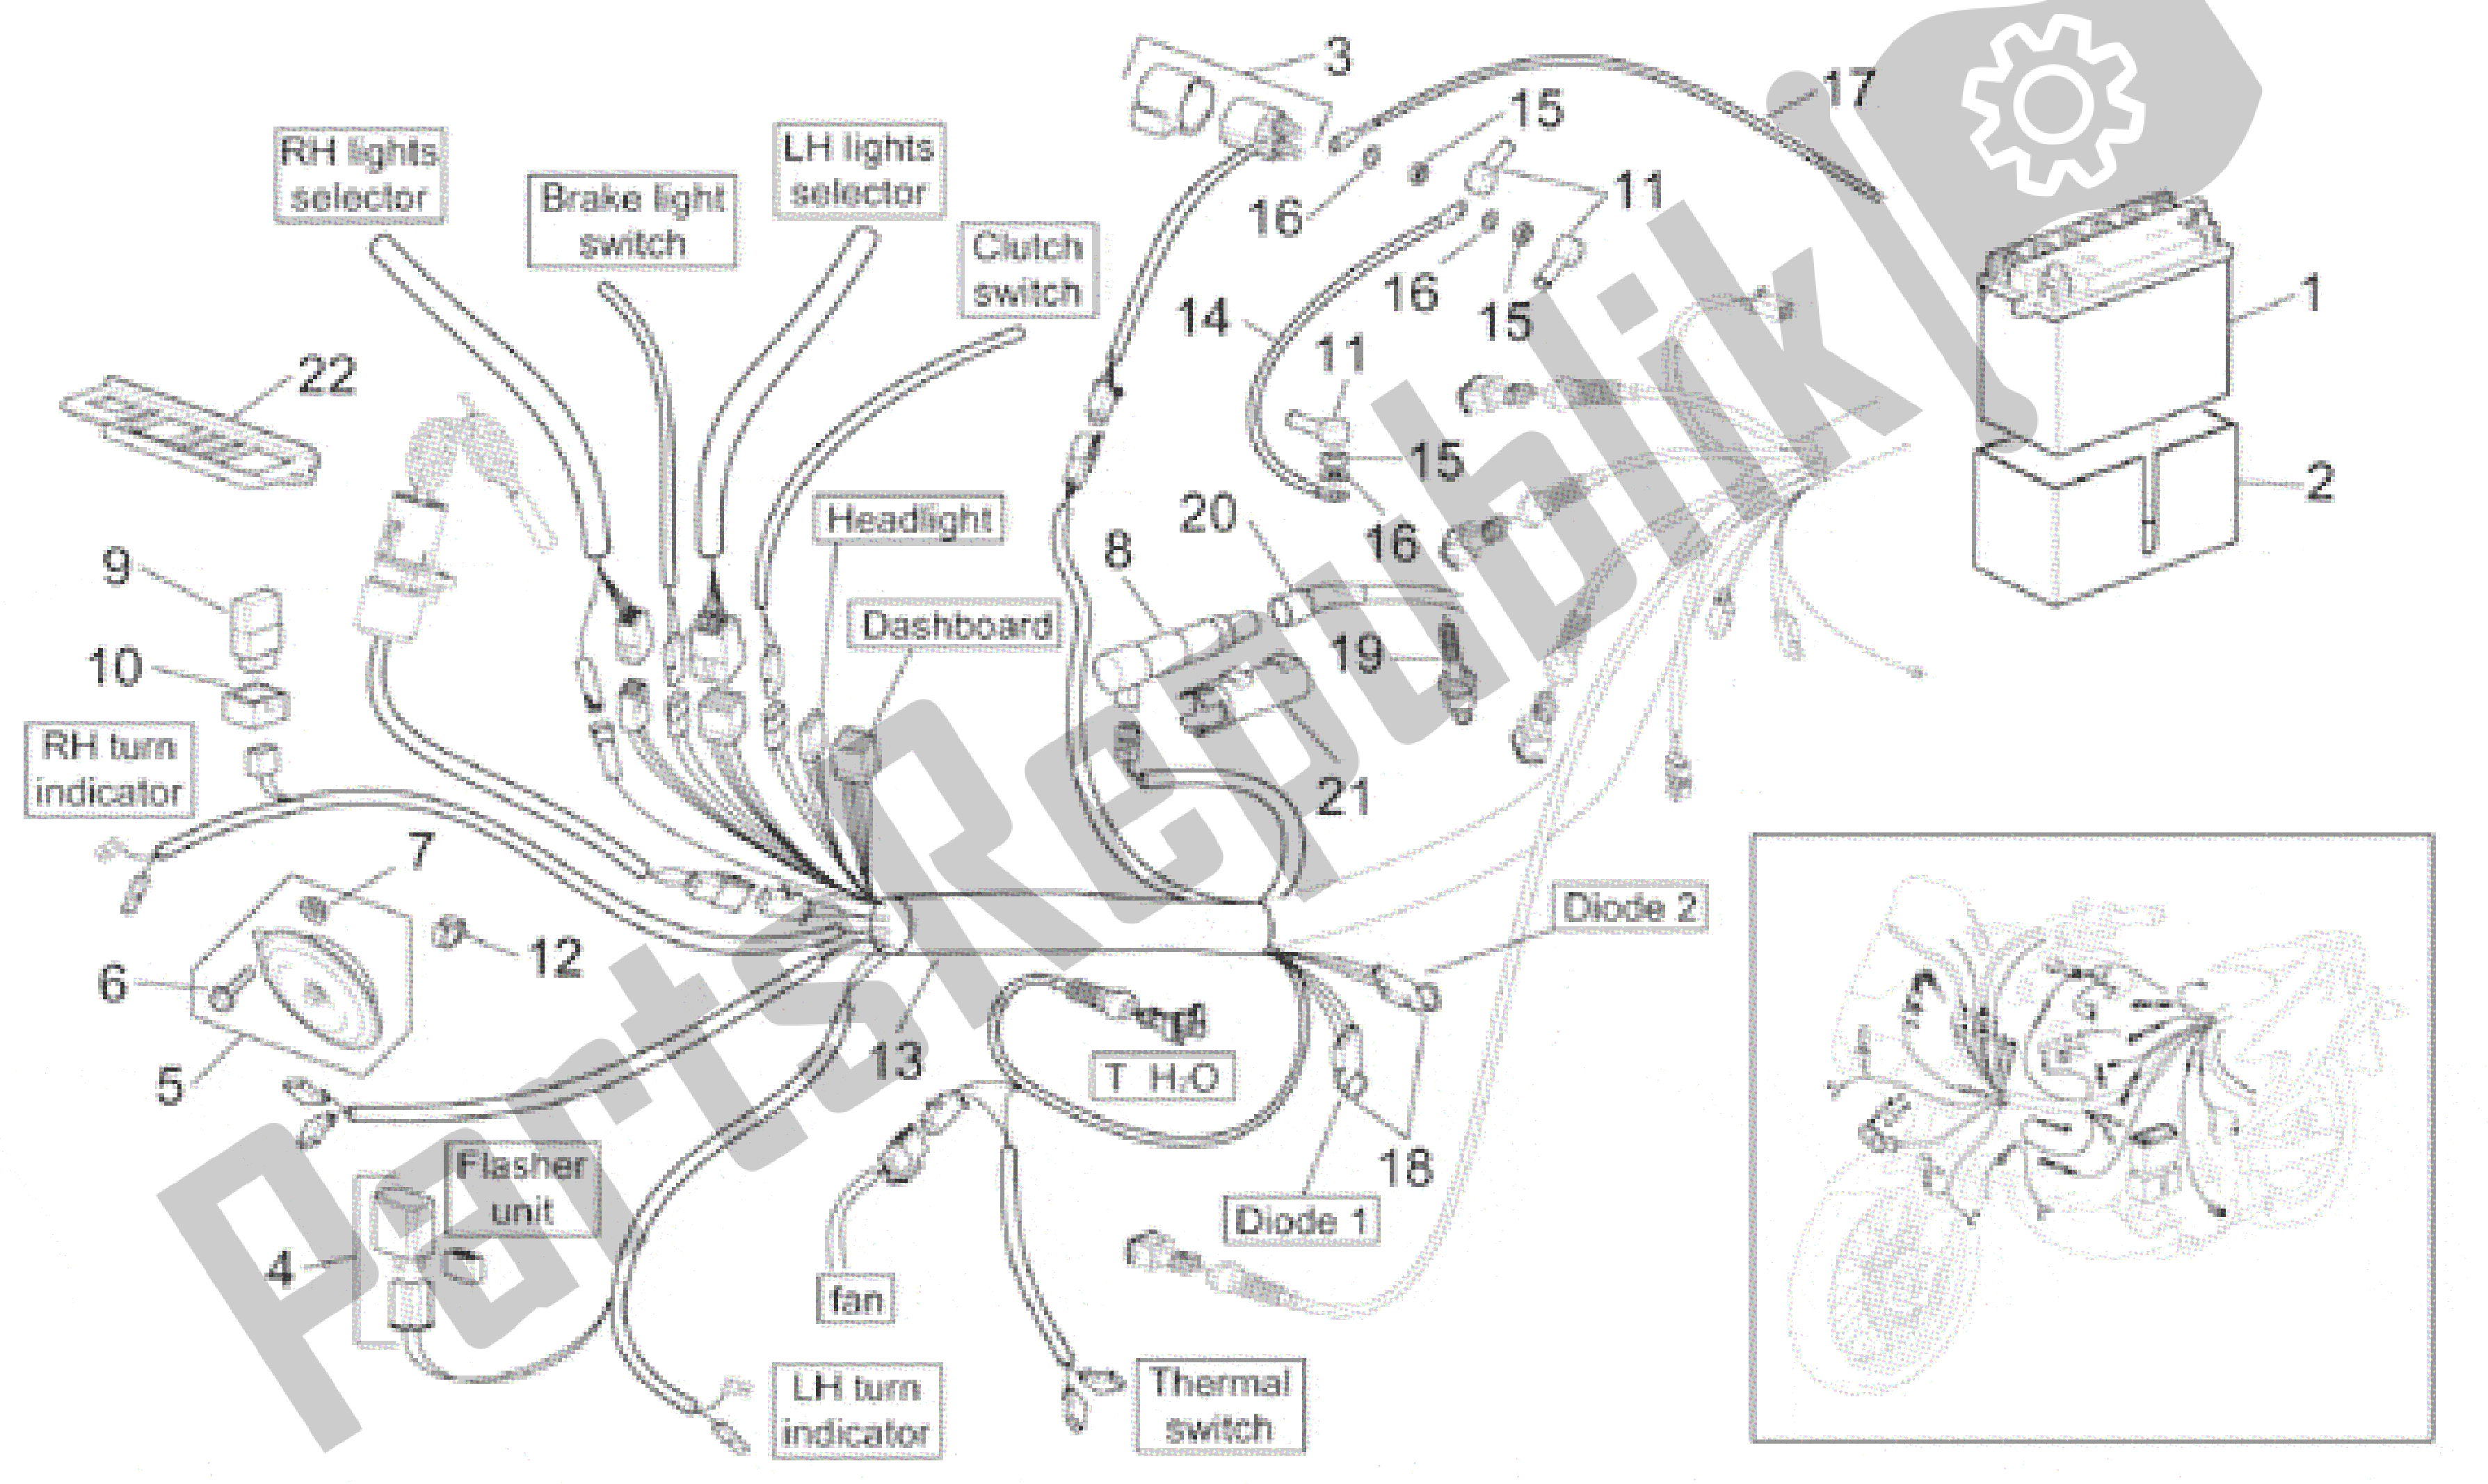 All parts for the Electrical System I of the Aprilia Pegaso 650 1997 - 2000